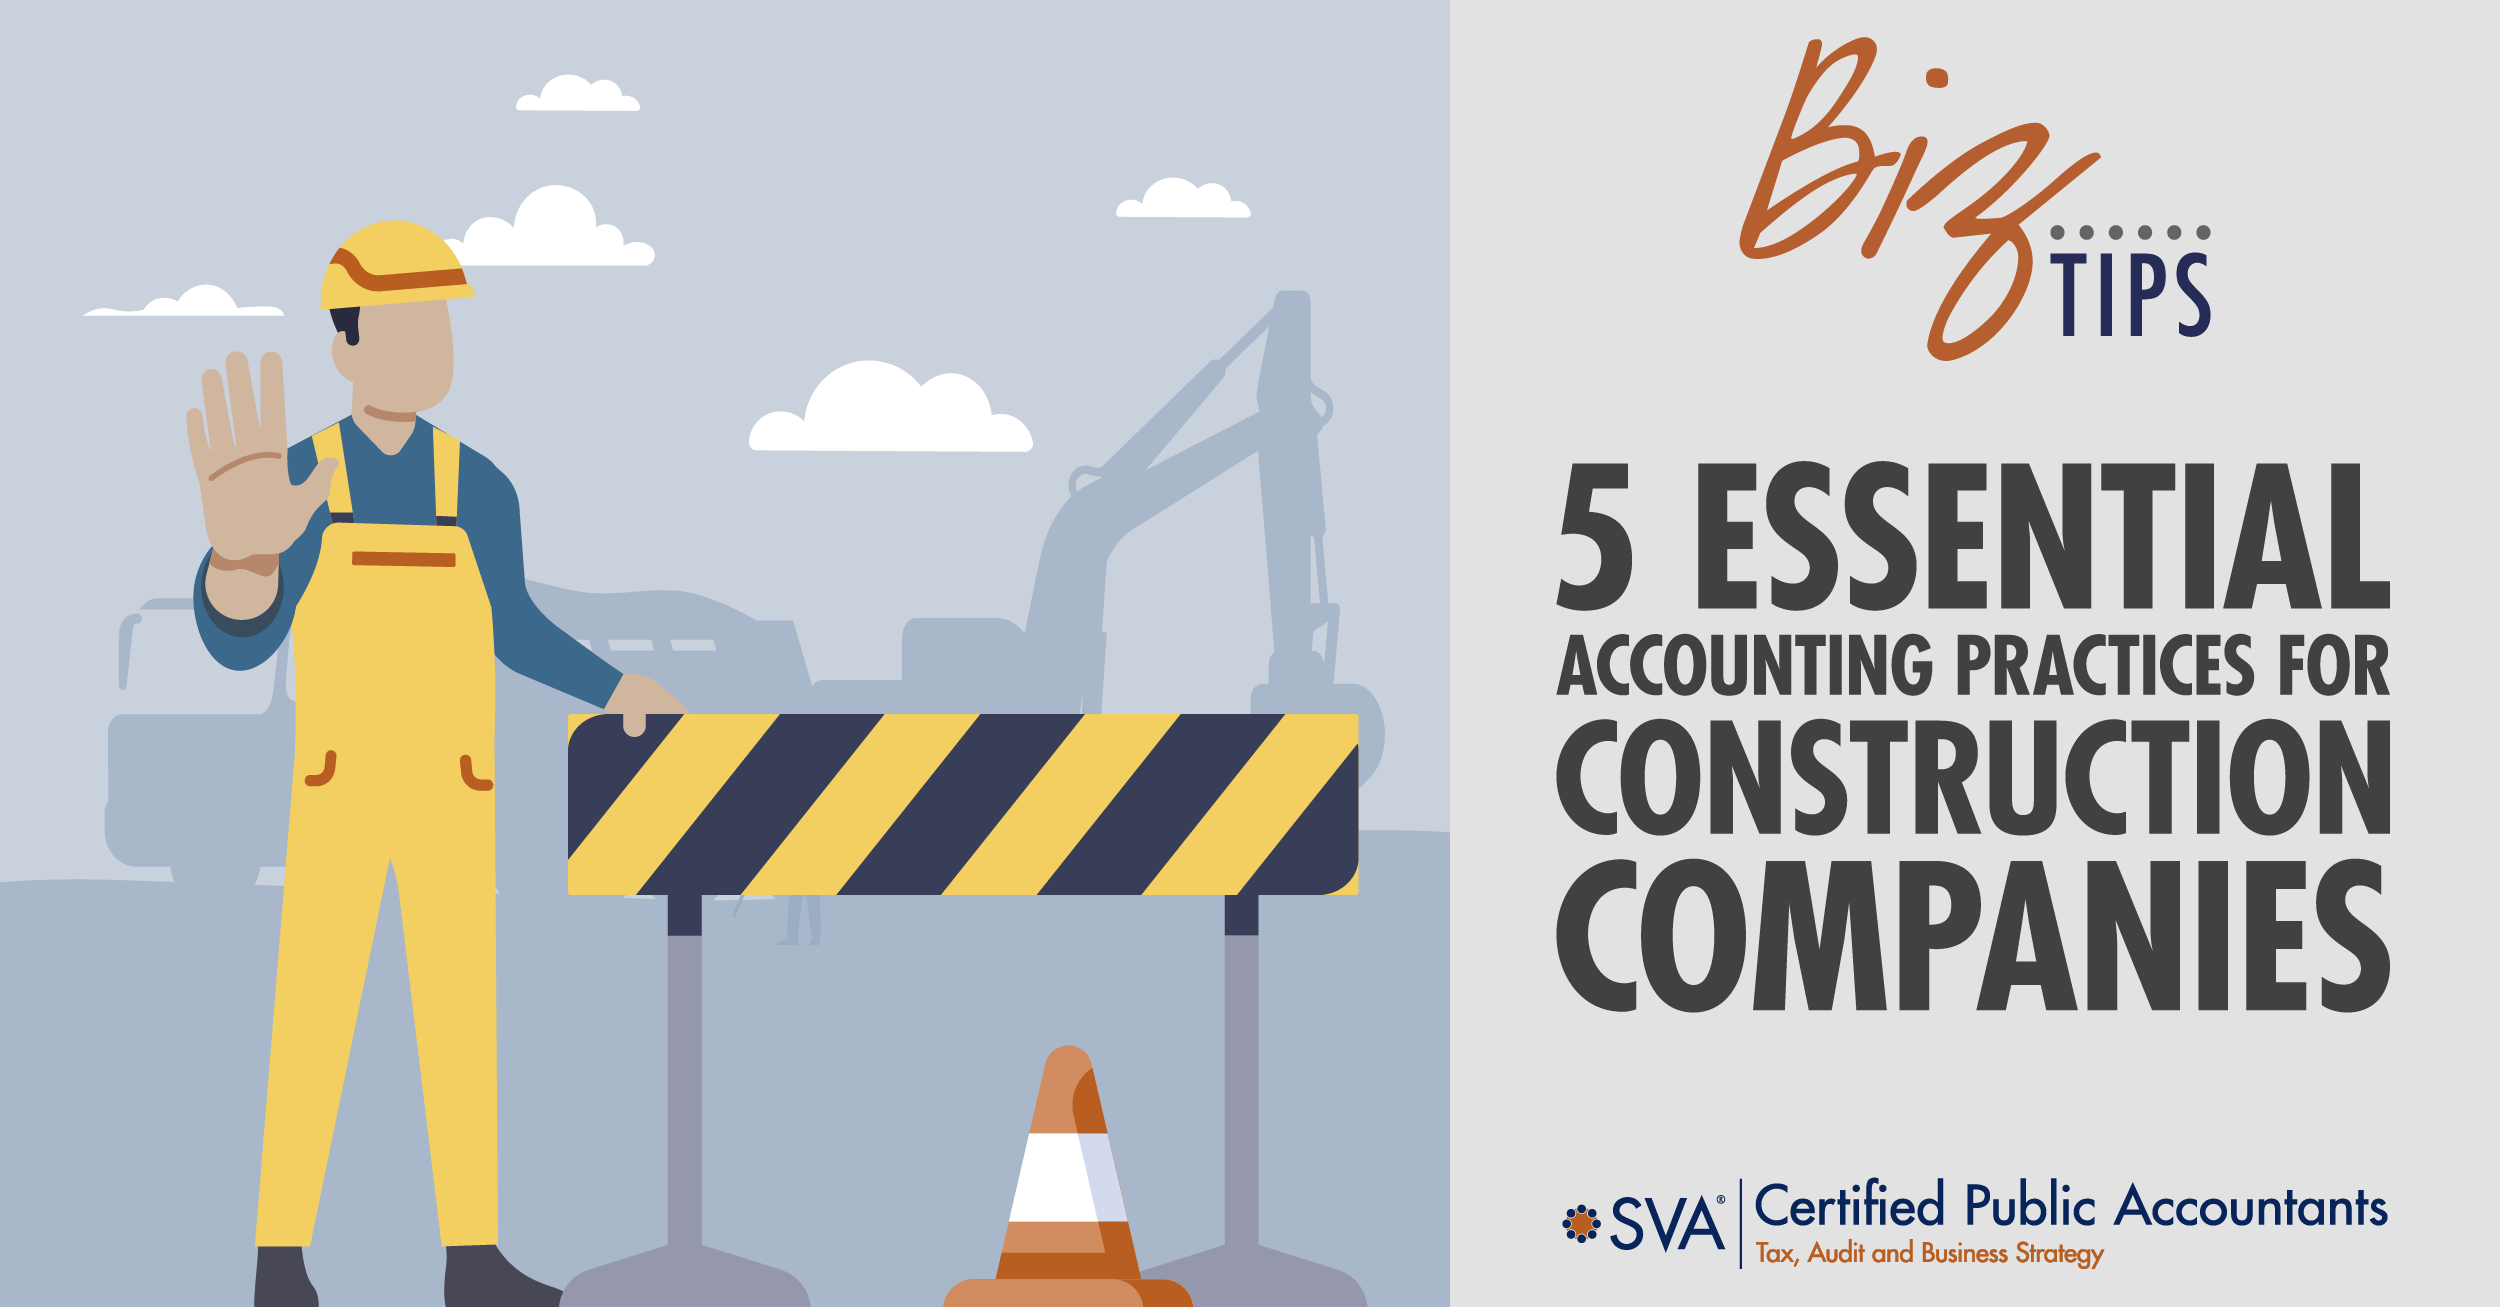 5 Essential Accounting Practices for Construction Companies